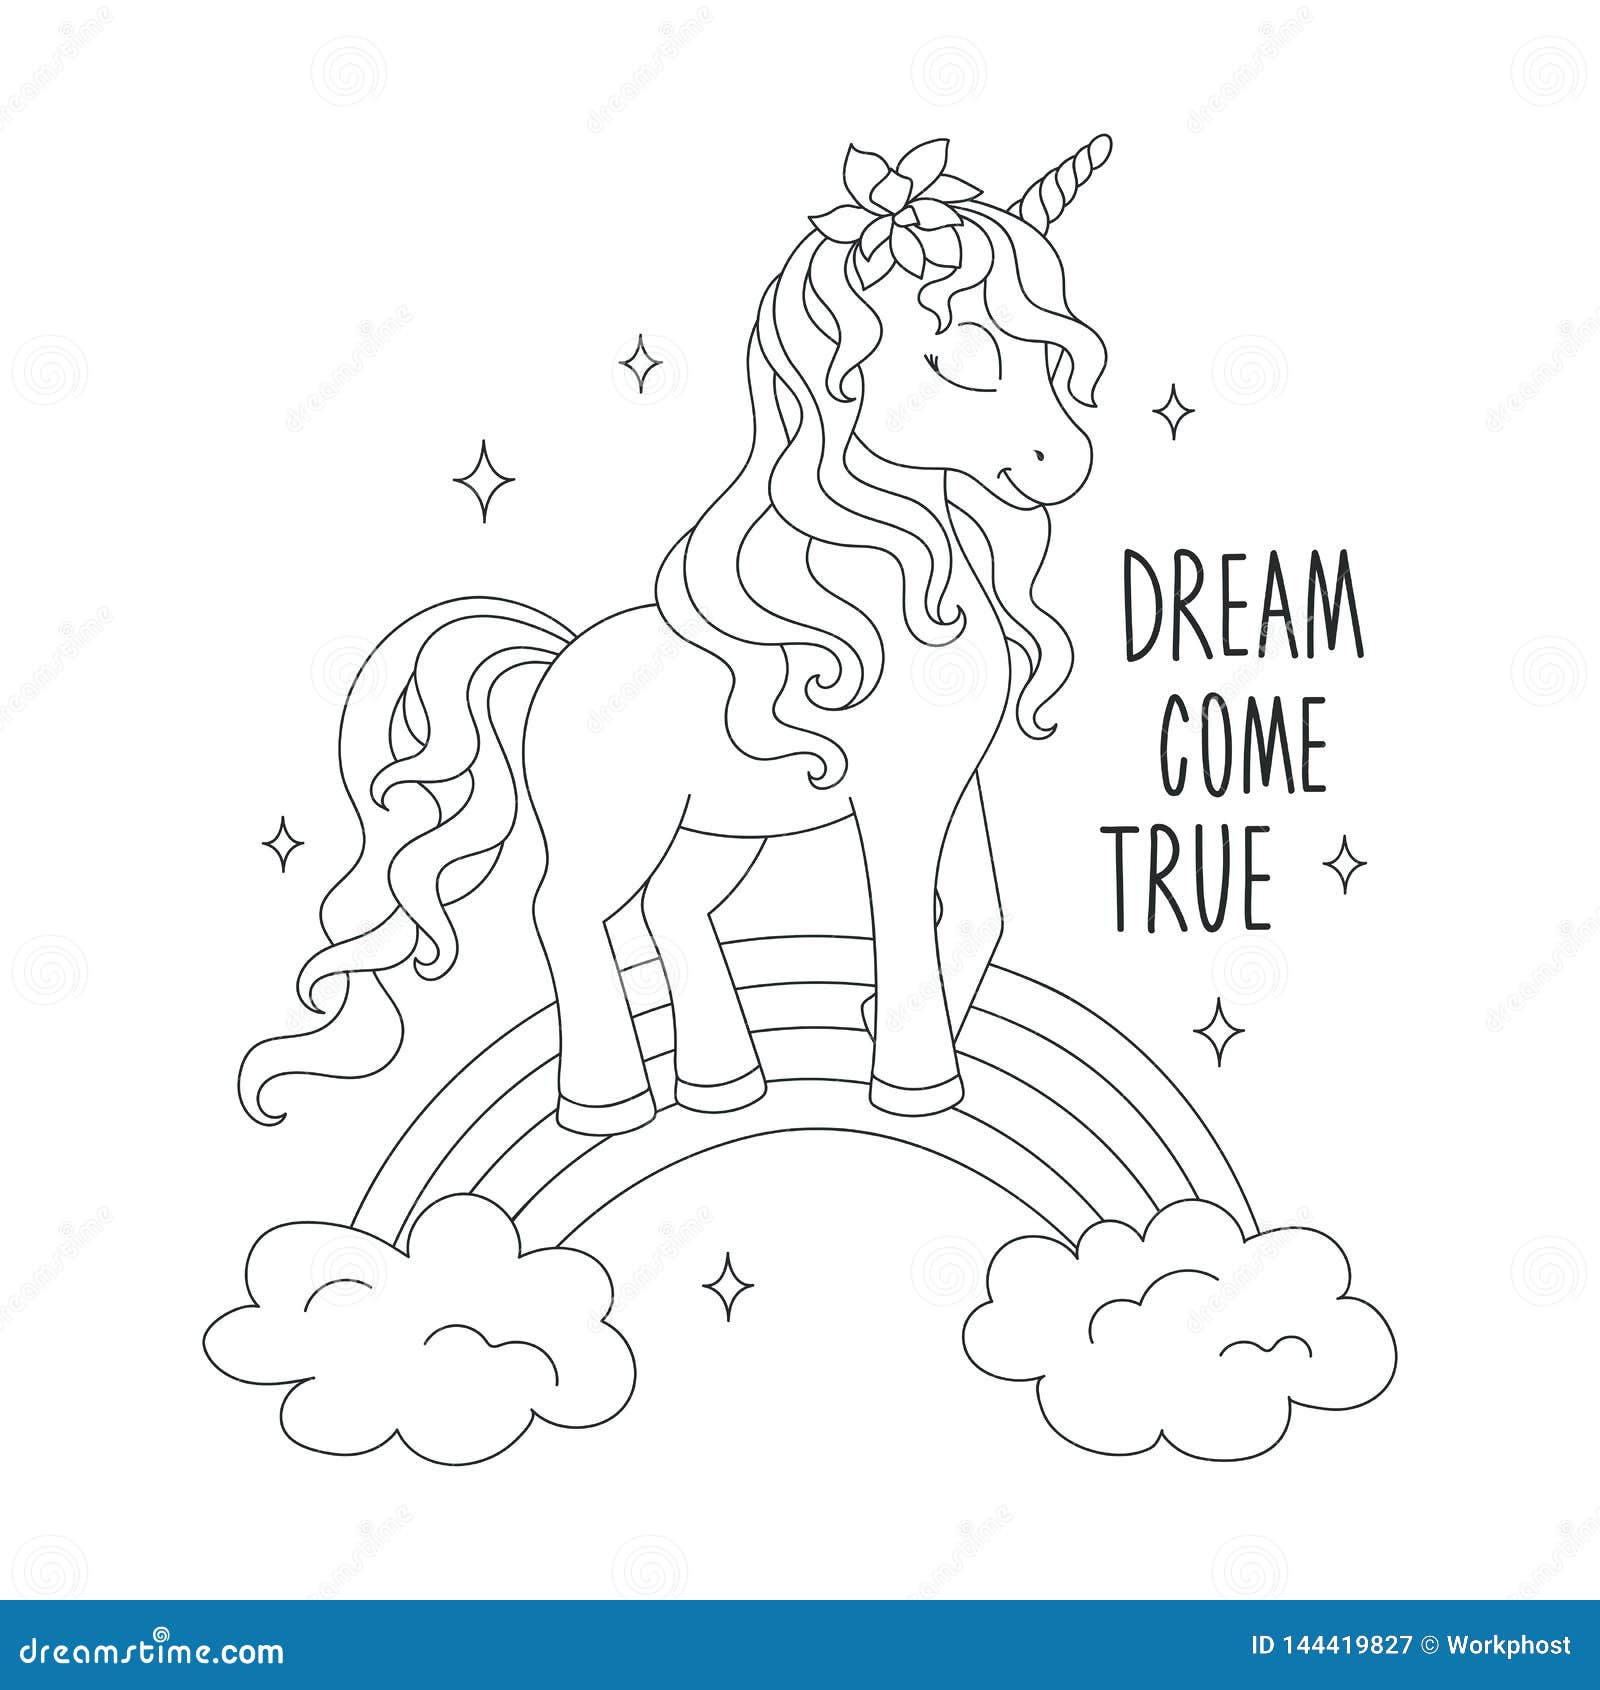 Unicorn On A Rainbow. Coloring Pages. Dream Come True Text. Design For Kids. Fashion ...